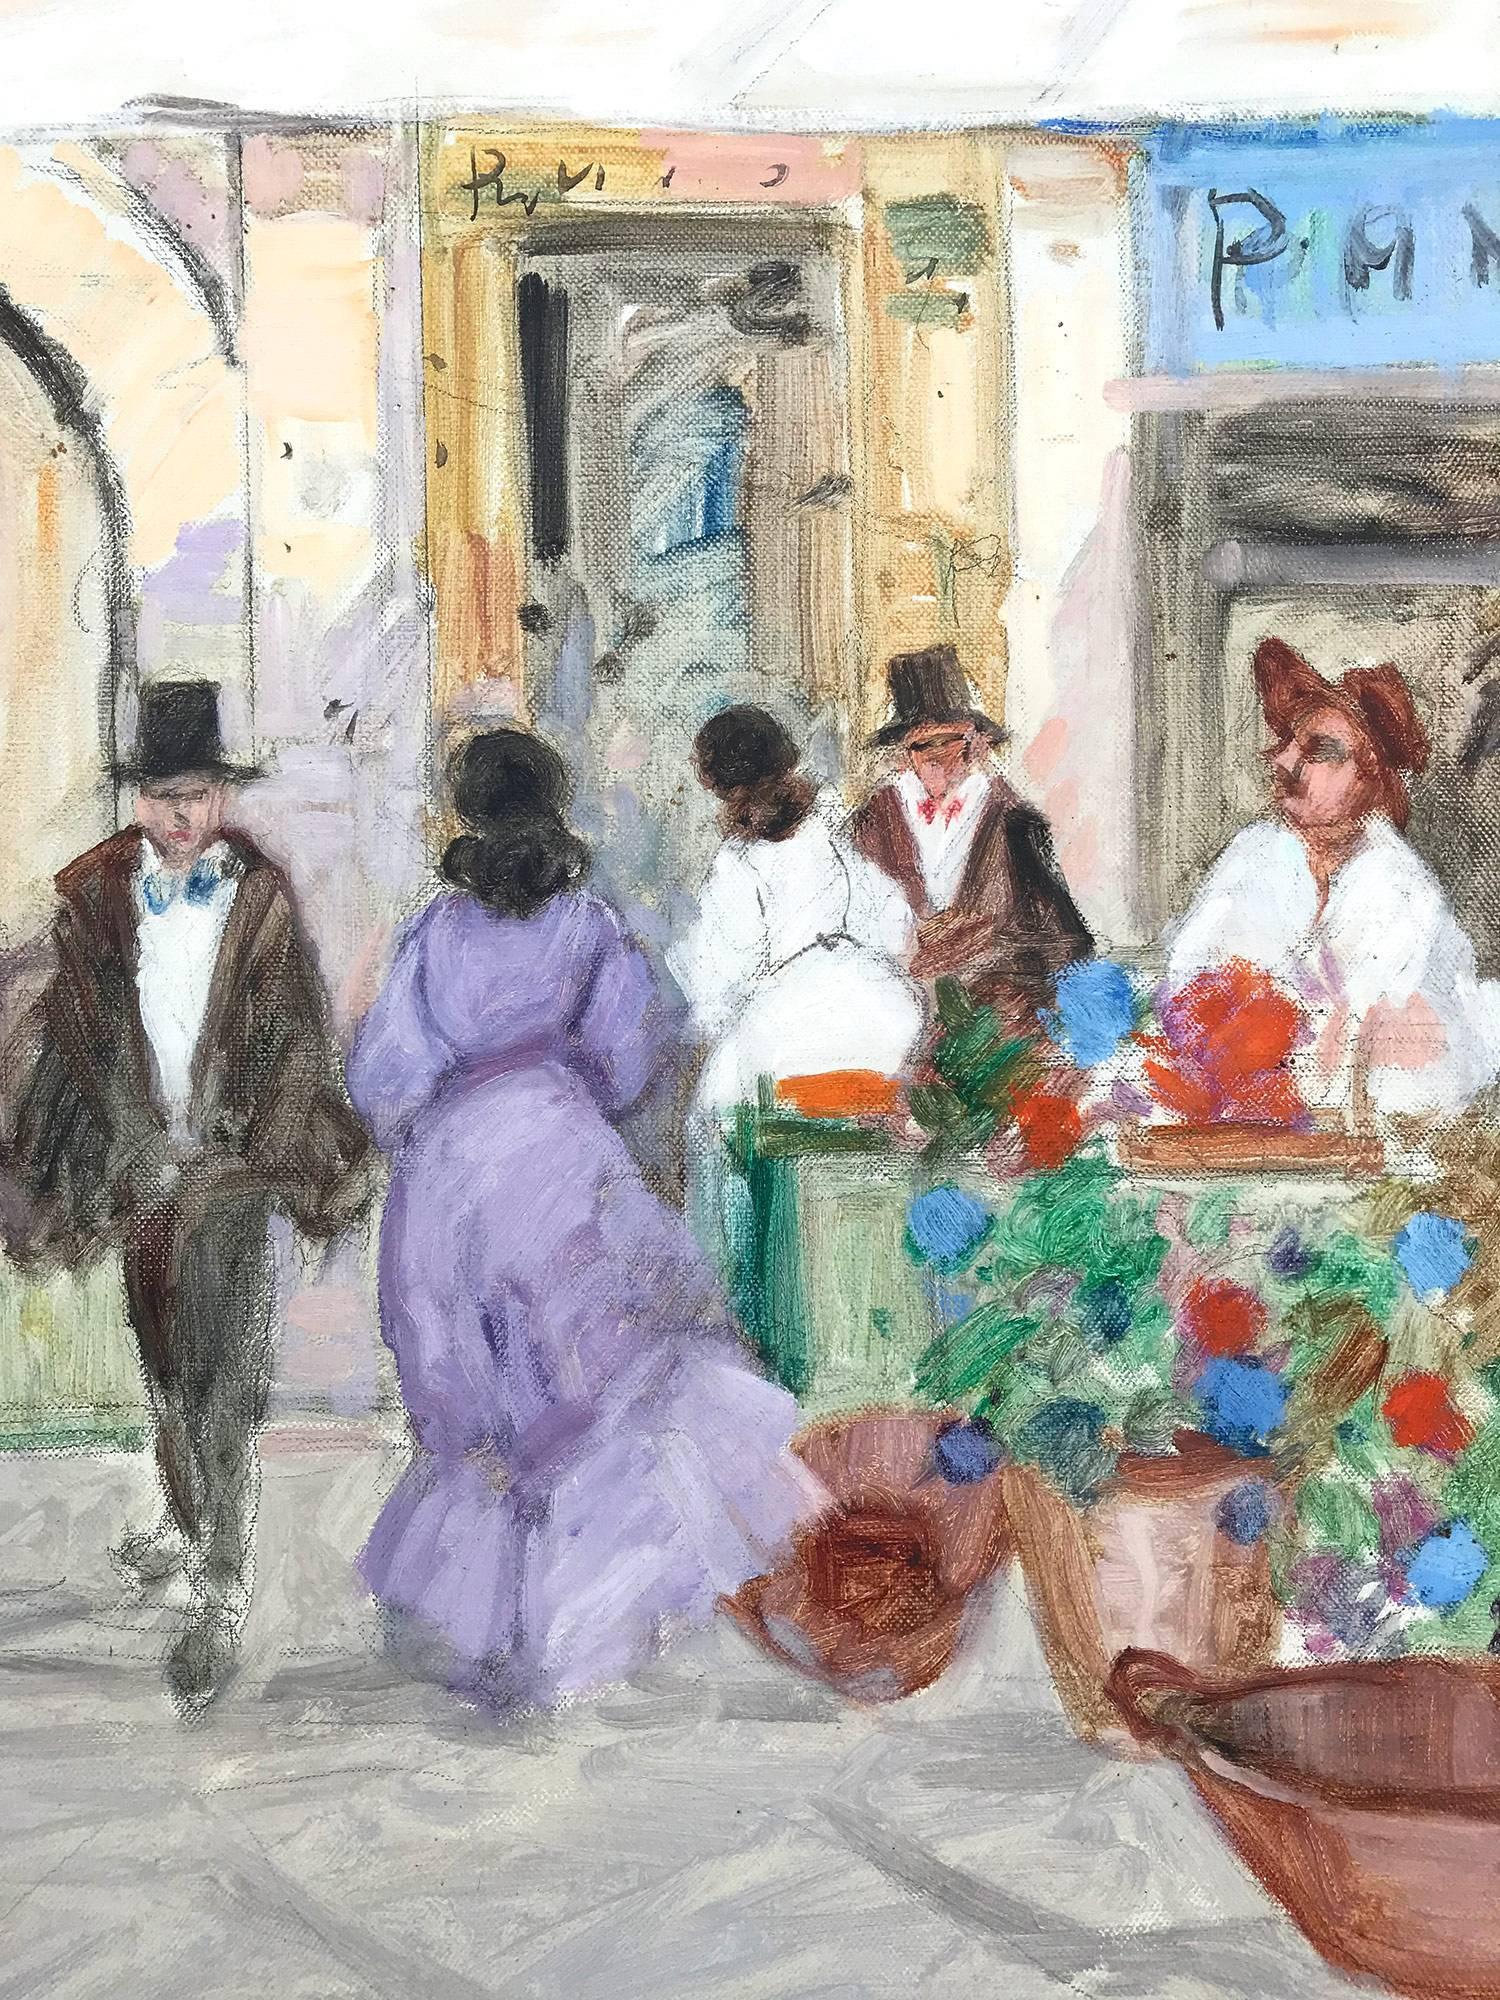 A whimsical oil painting depicting a market-place scene in Paris, France by Luigi Cagliani. As an Italian Impressionist artist, most of Cagliani's works were produced in the first half of the 20th Century. He was known for his charming compositions